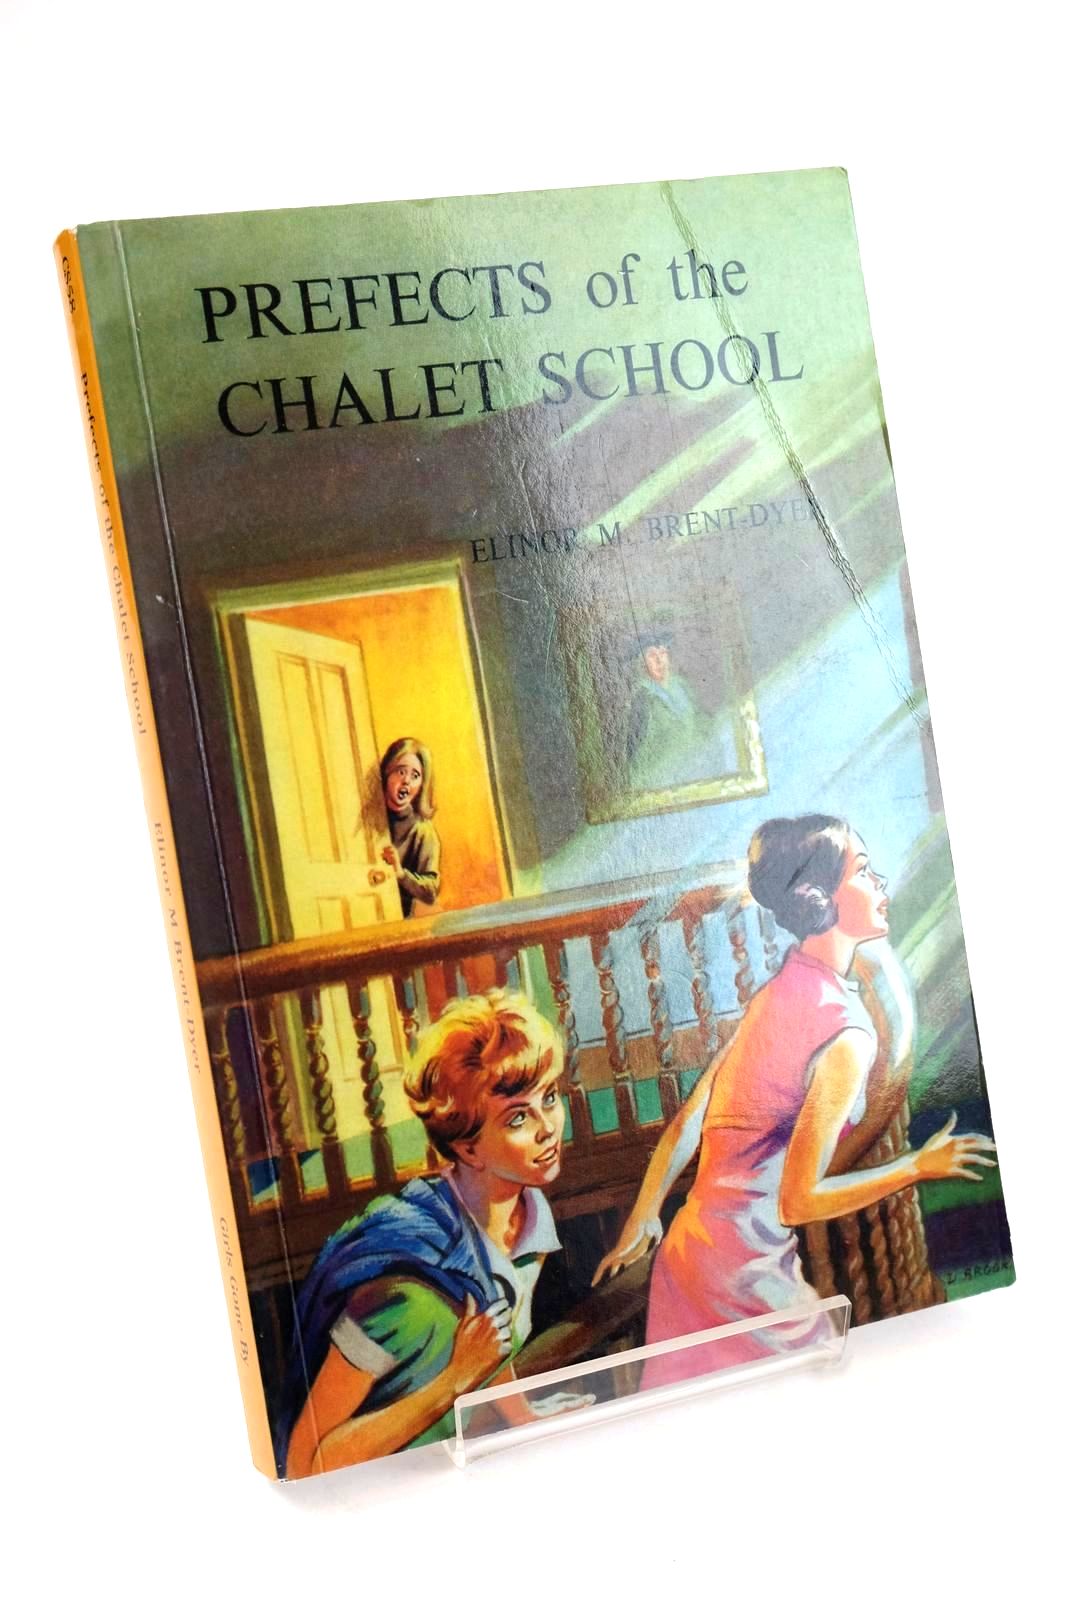 Photo of PREFECTS OF THE CHALET SCHOOL written by Brent-Dyer, Elinor M. illustrated by Brook, D. published by Girls Gone By (STOCK CODE: 1324201)  for sale by Stella & Rose's Books